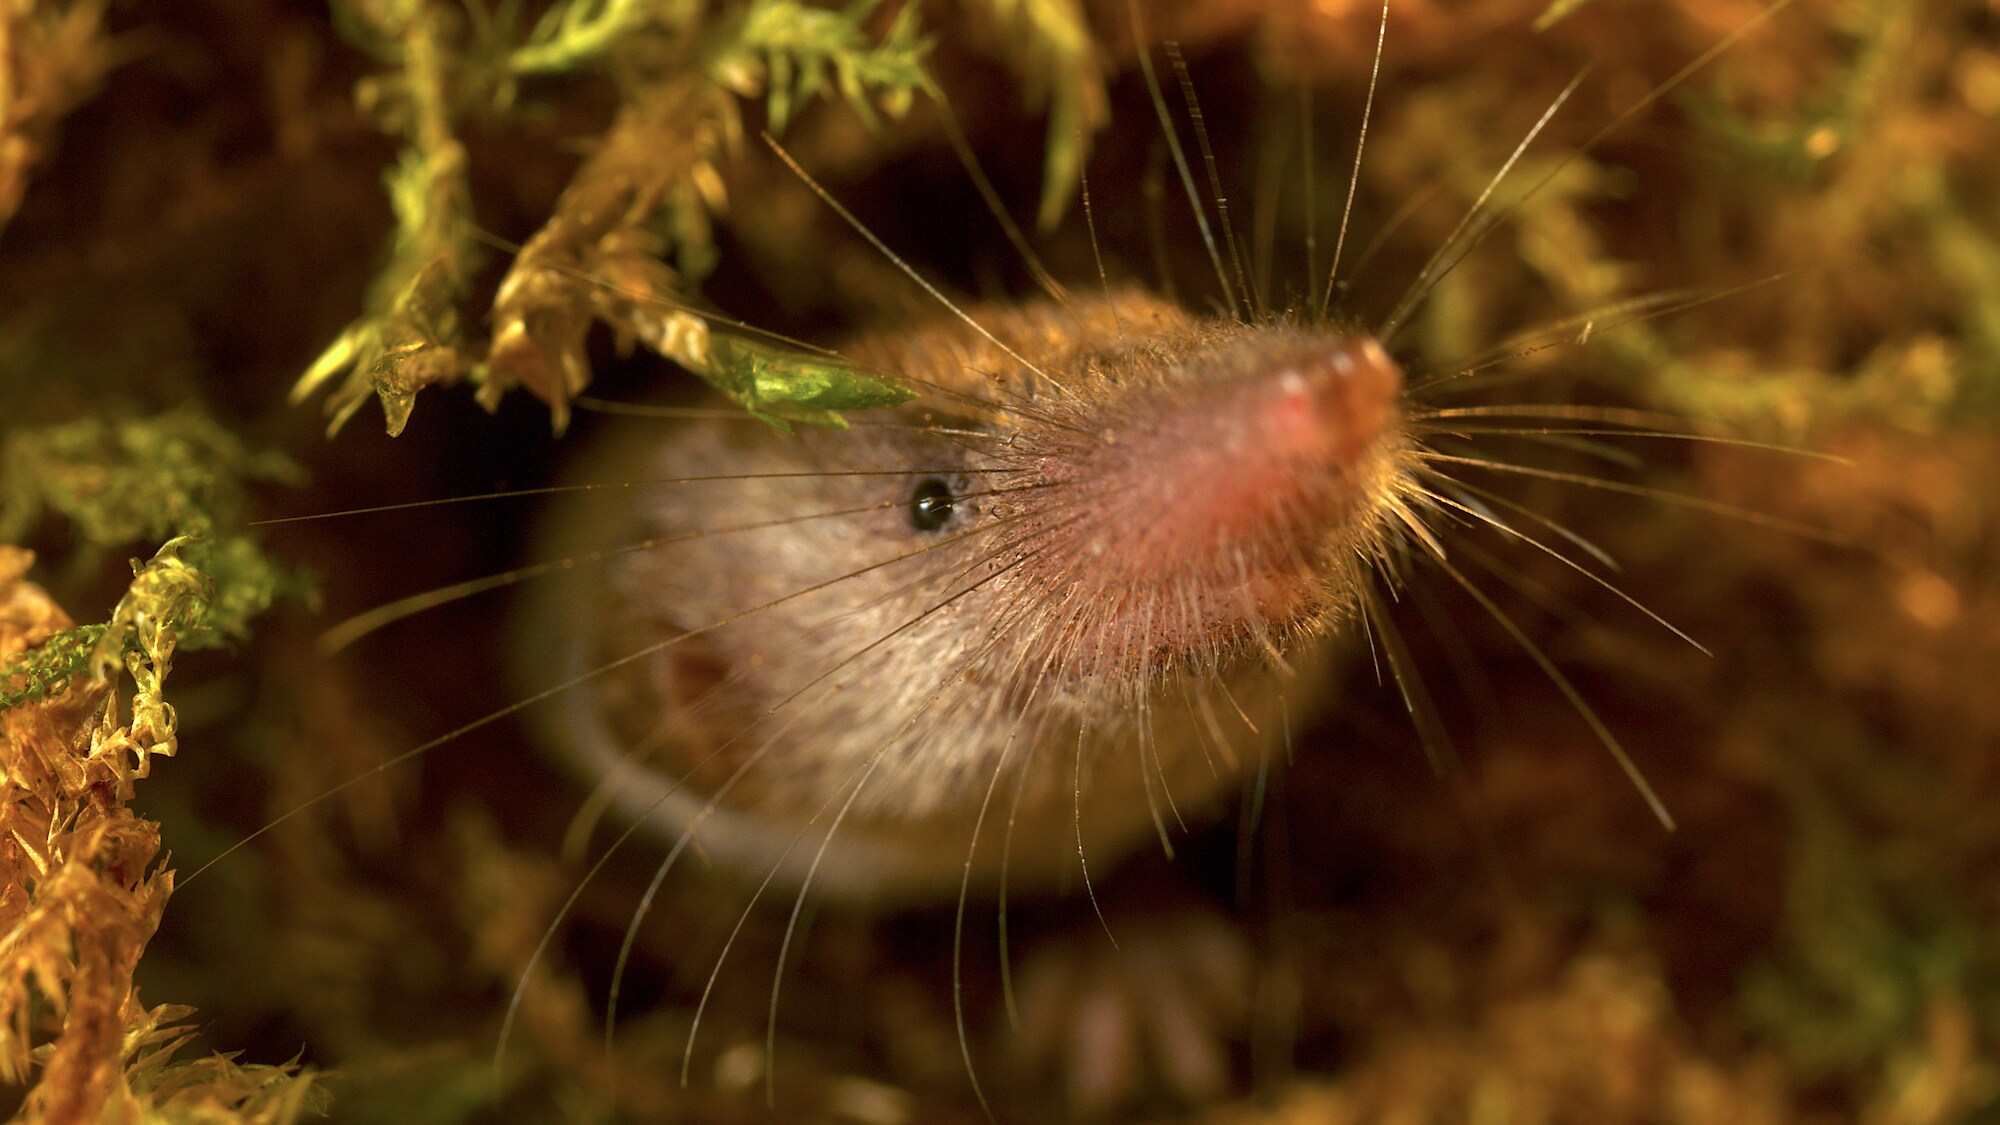 Close-up of an etruscan shrew face at the Manchester Zoo UK. (National Geographic for Disney+/Jonjo Harrington)